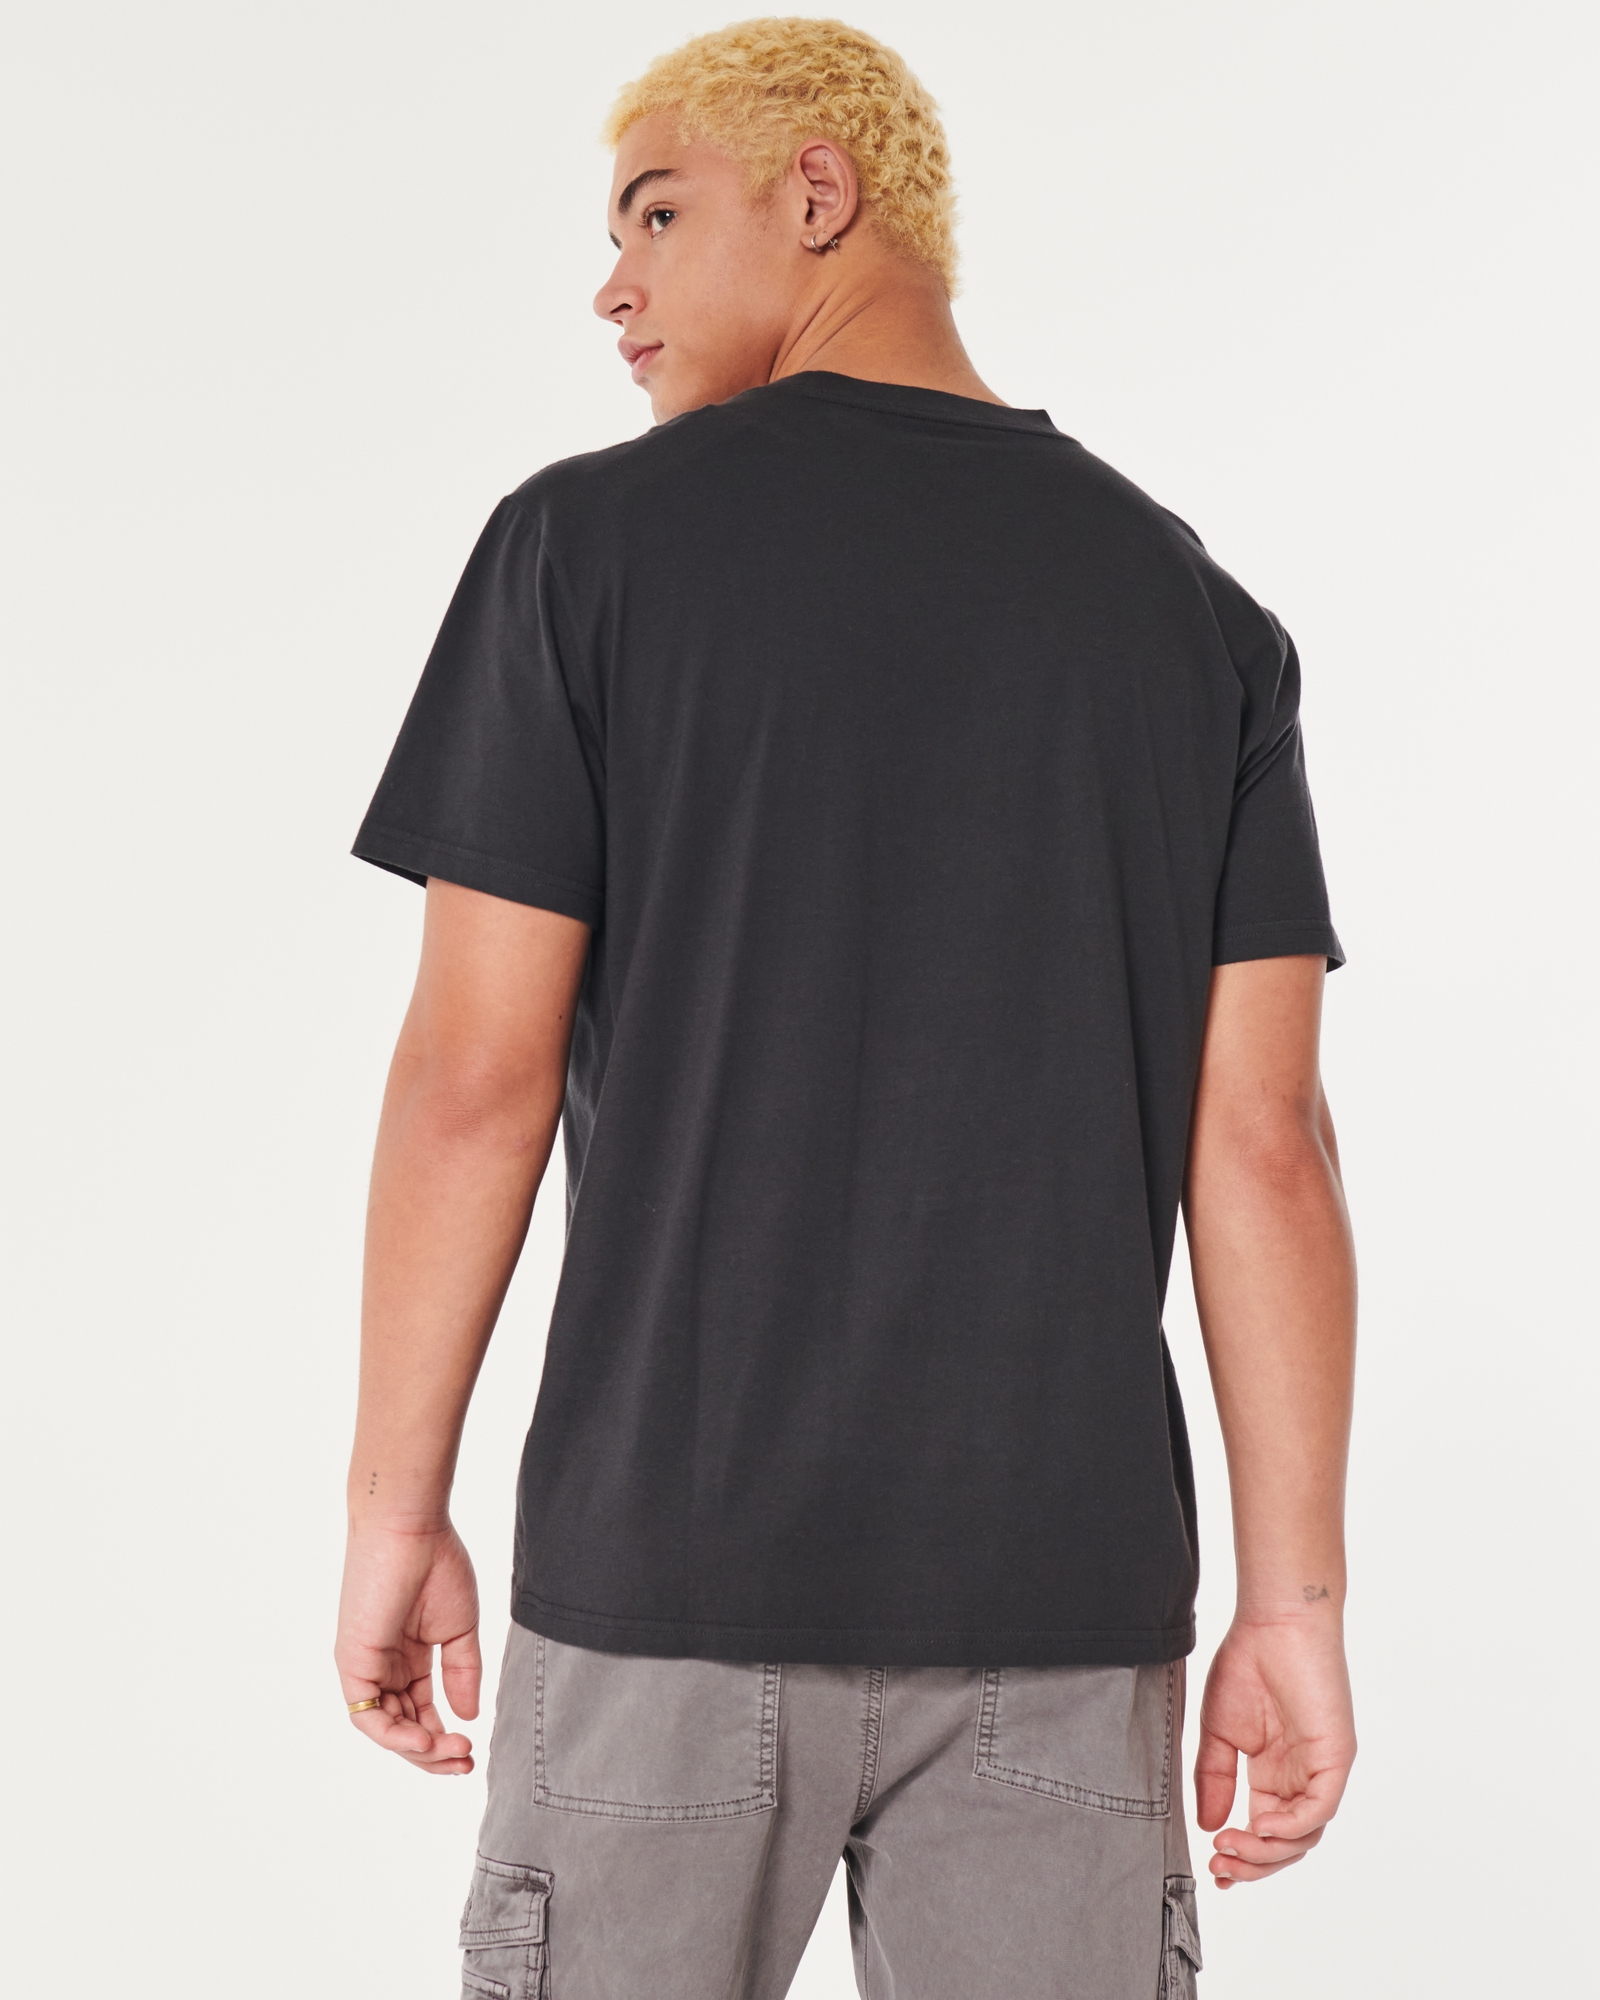 Buy Achiever Keyhole Back Graphic Tee online